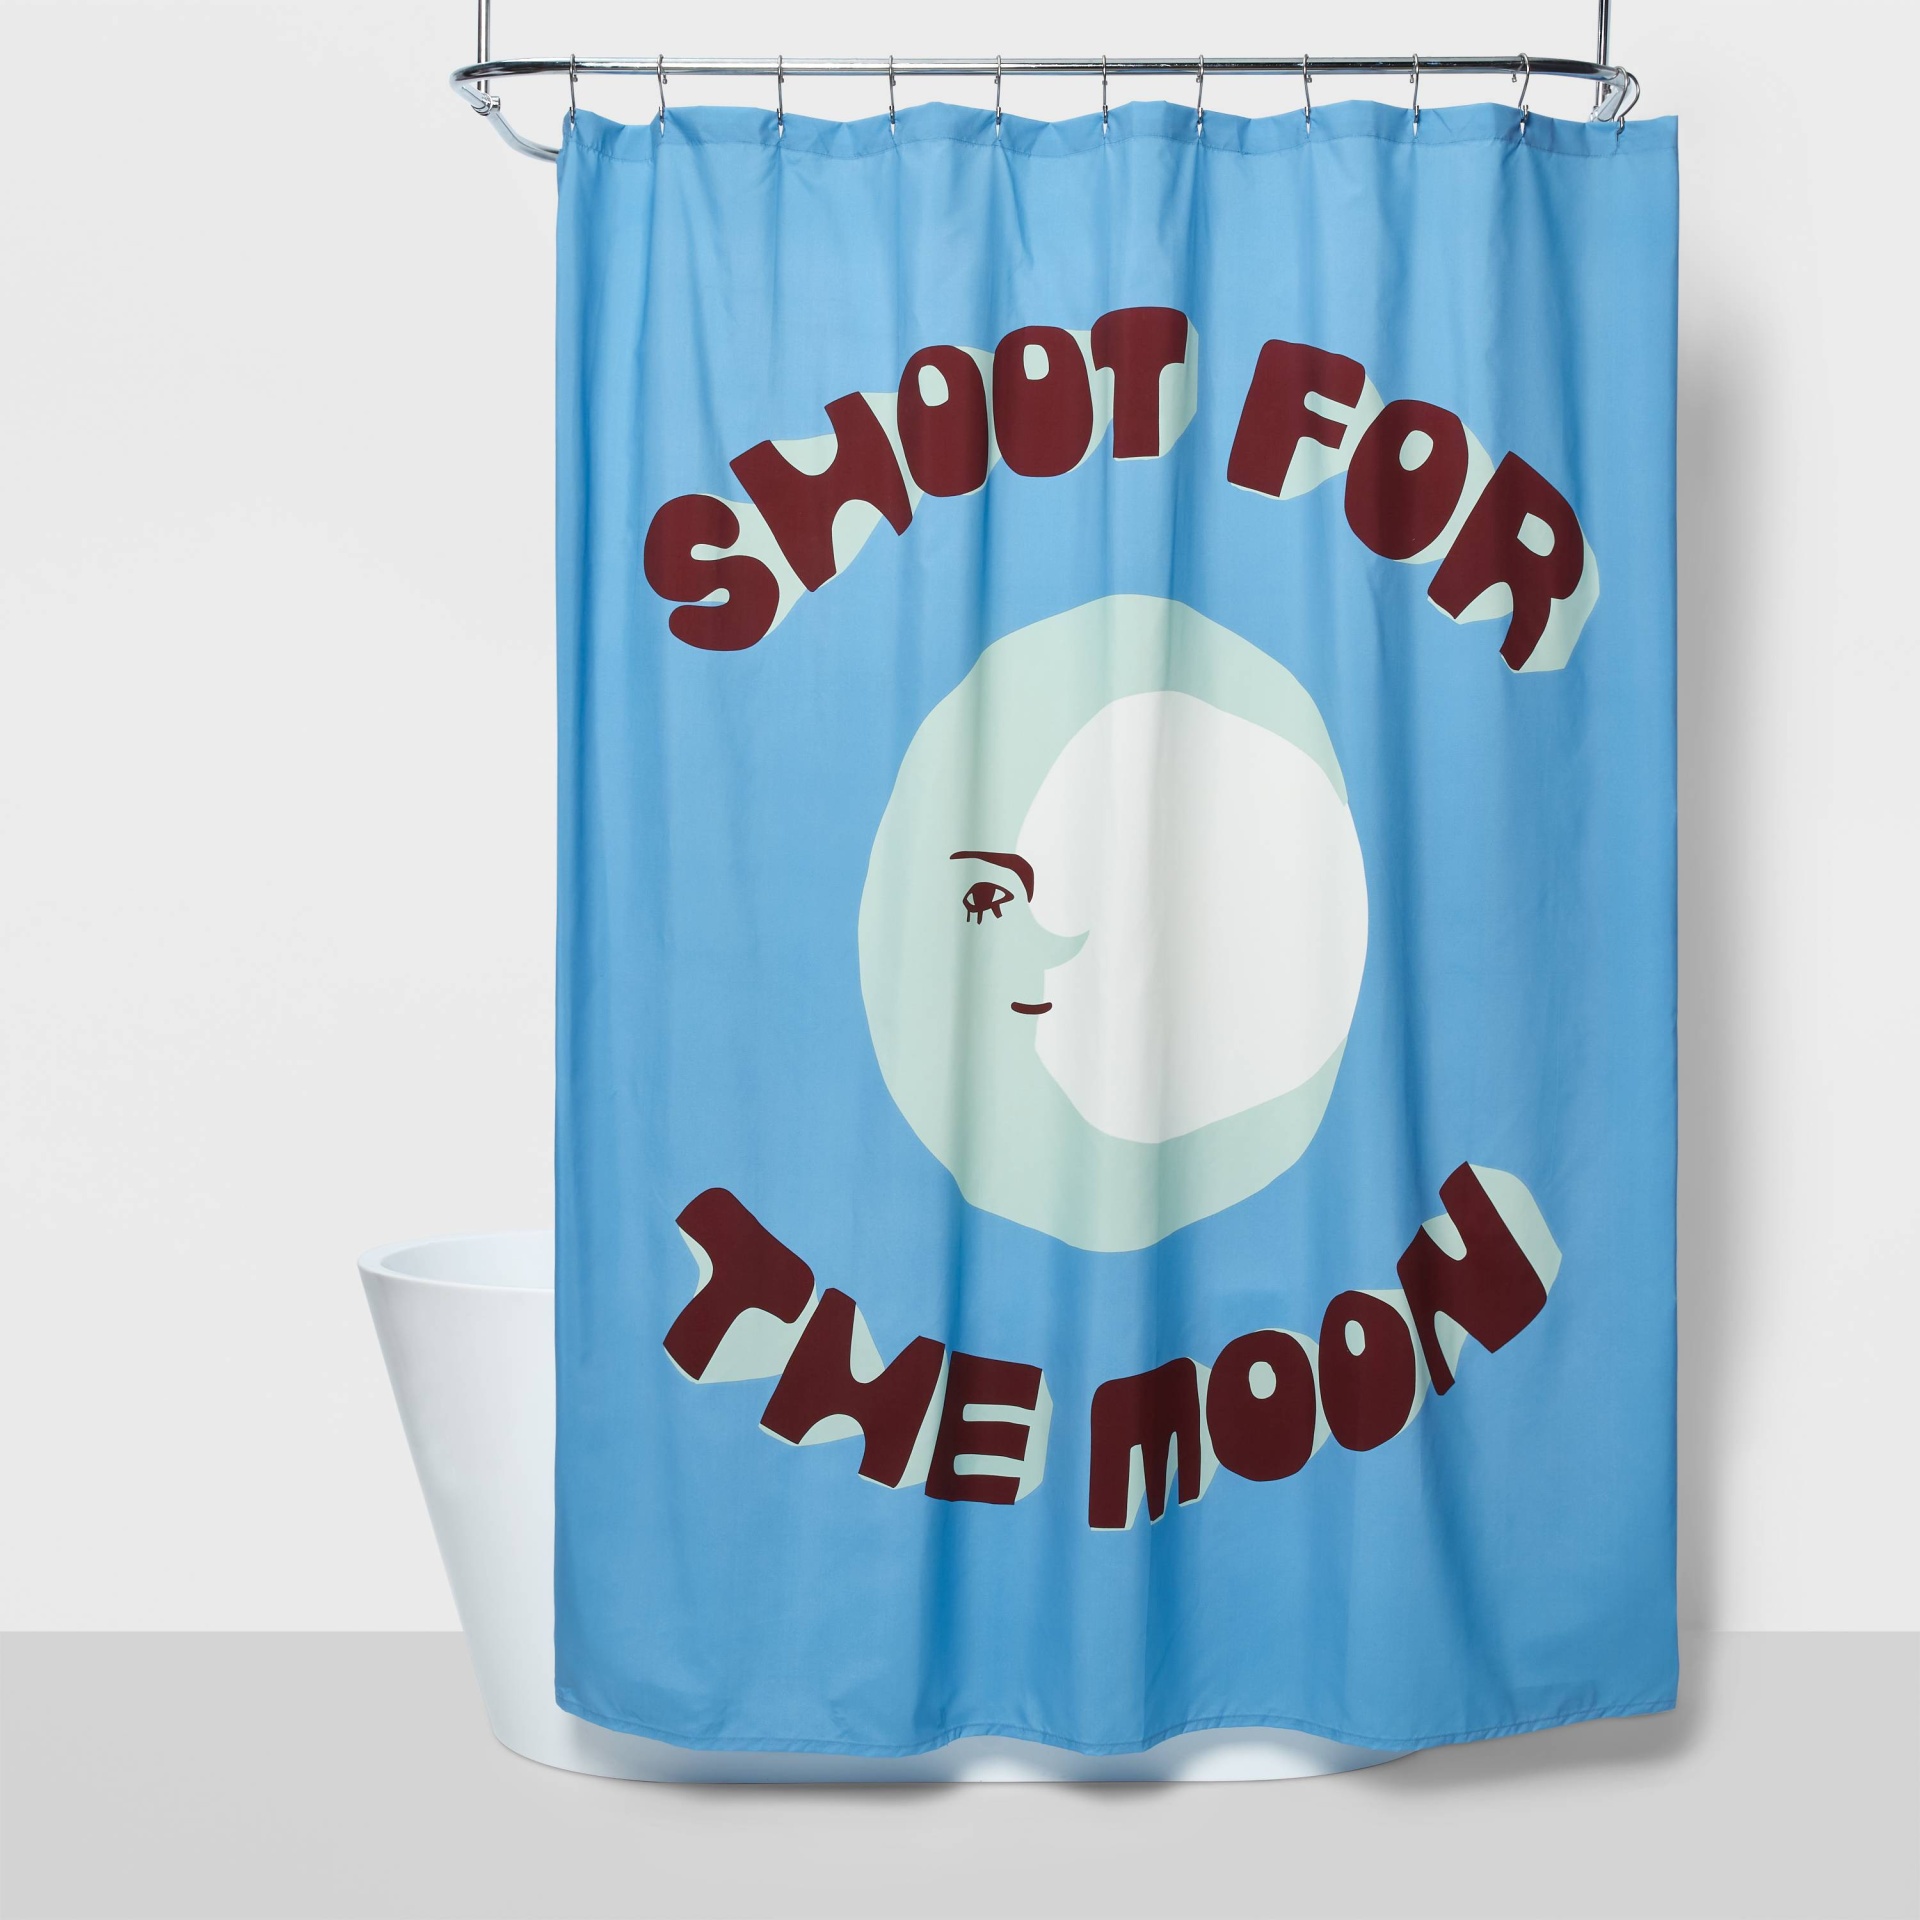 slide 1 of 4, Shoot for the Moon Microfiber Shower Curtain - Room Essentials, 1 ct